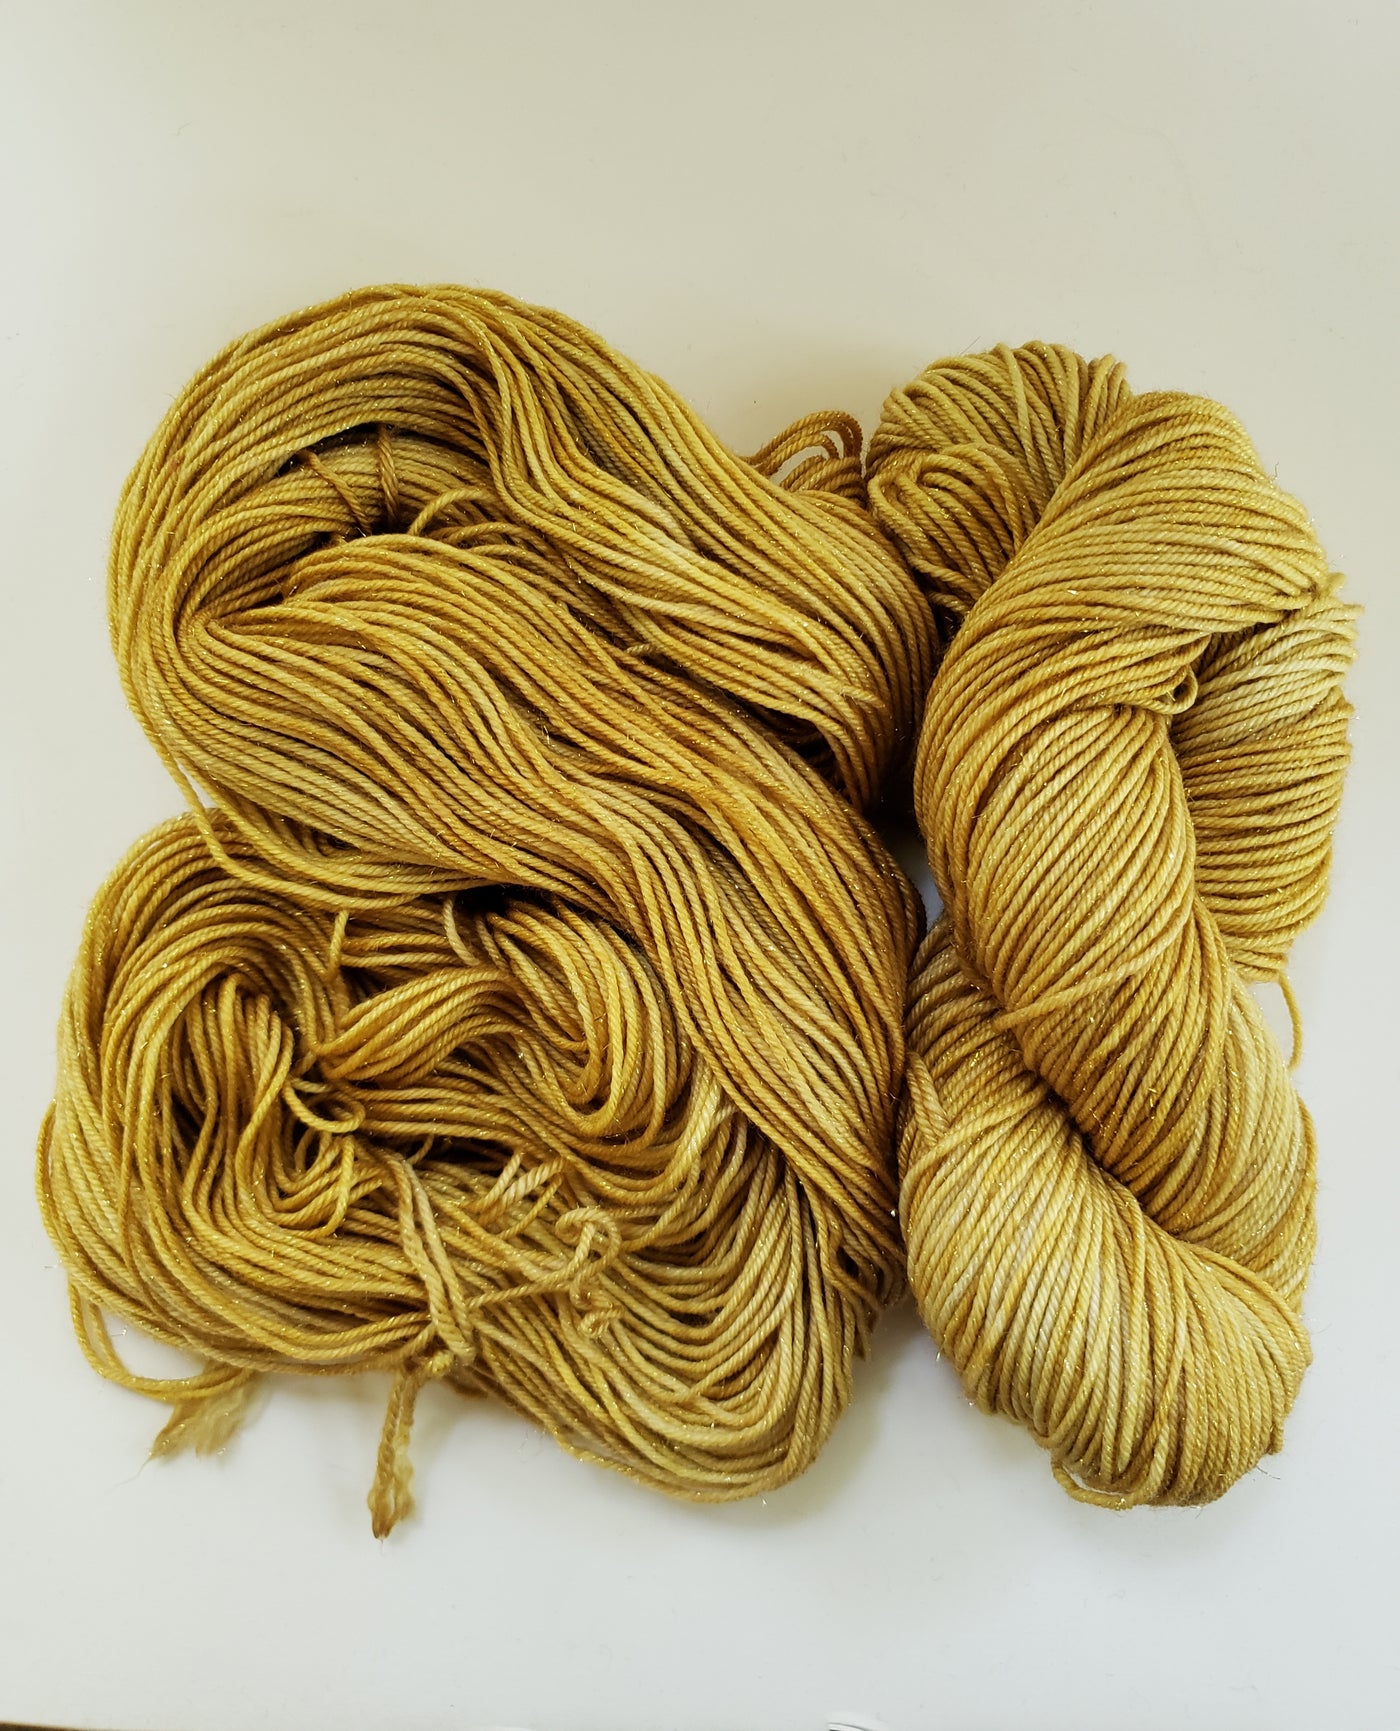 STAR DUST SPARKLE - Merino/Gold Stellina - Hand Dyed Shades of Gold - Yarn  for Rug Hooking - RSS248